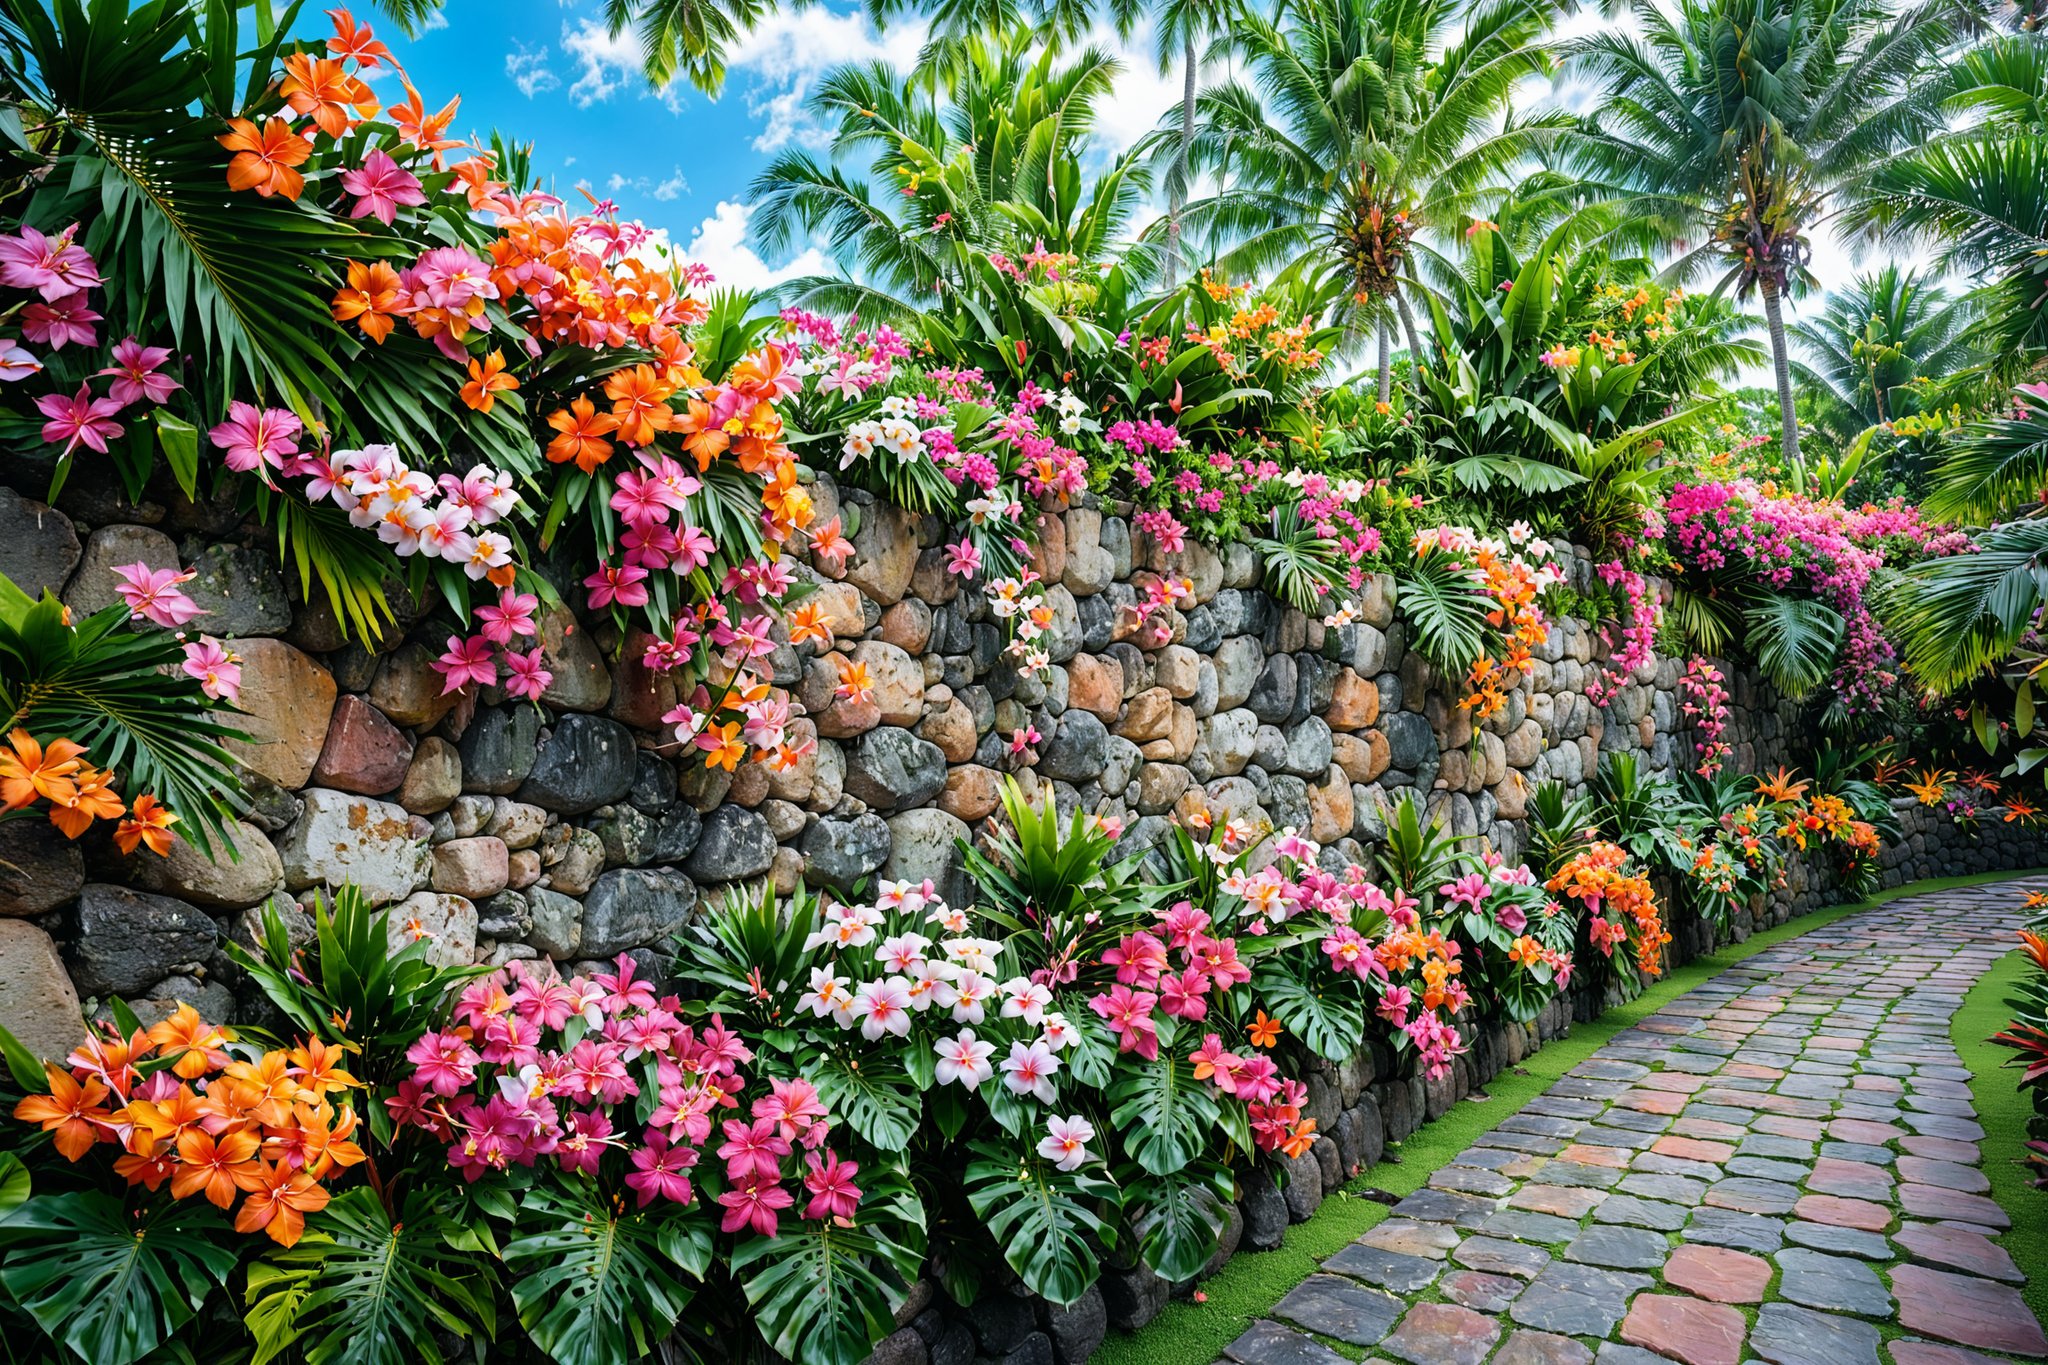 A vibrant tropical setting with a stone wall as the backdrop. The wall is adorned with a myriad of colorful flowers, ranging from pink to orange, with some even hanging down. Above the wall, tall palm trees sway gently, their fronds displaying a lush green hue. The sky is clear, suggesting a bright and sunny day. The entire scene exudes a sense of tranquility and natural beauty.